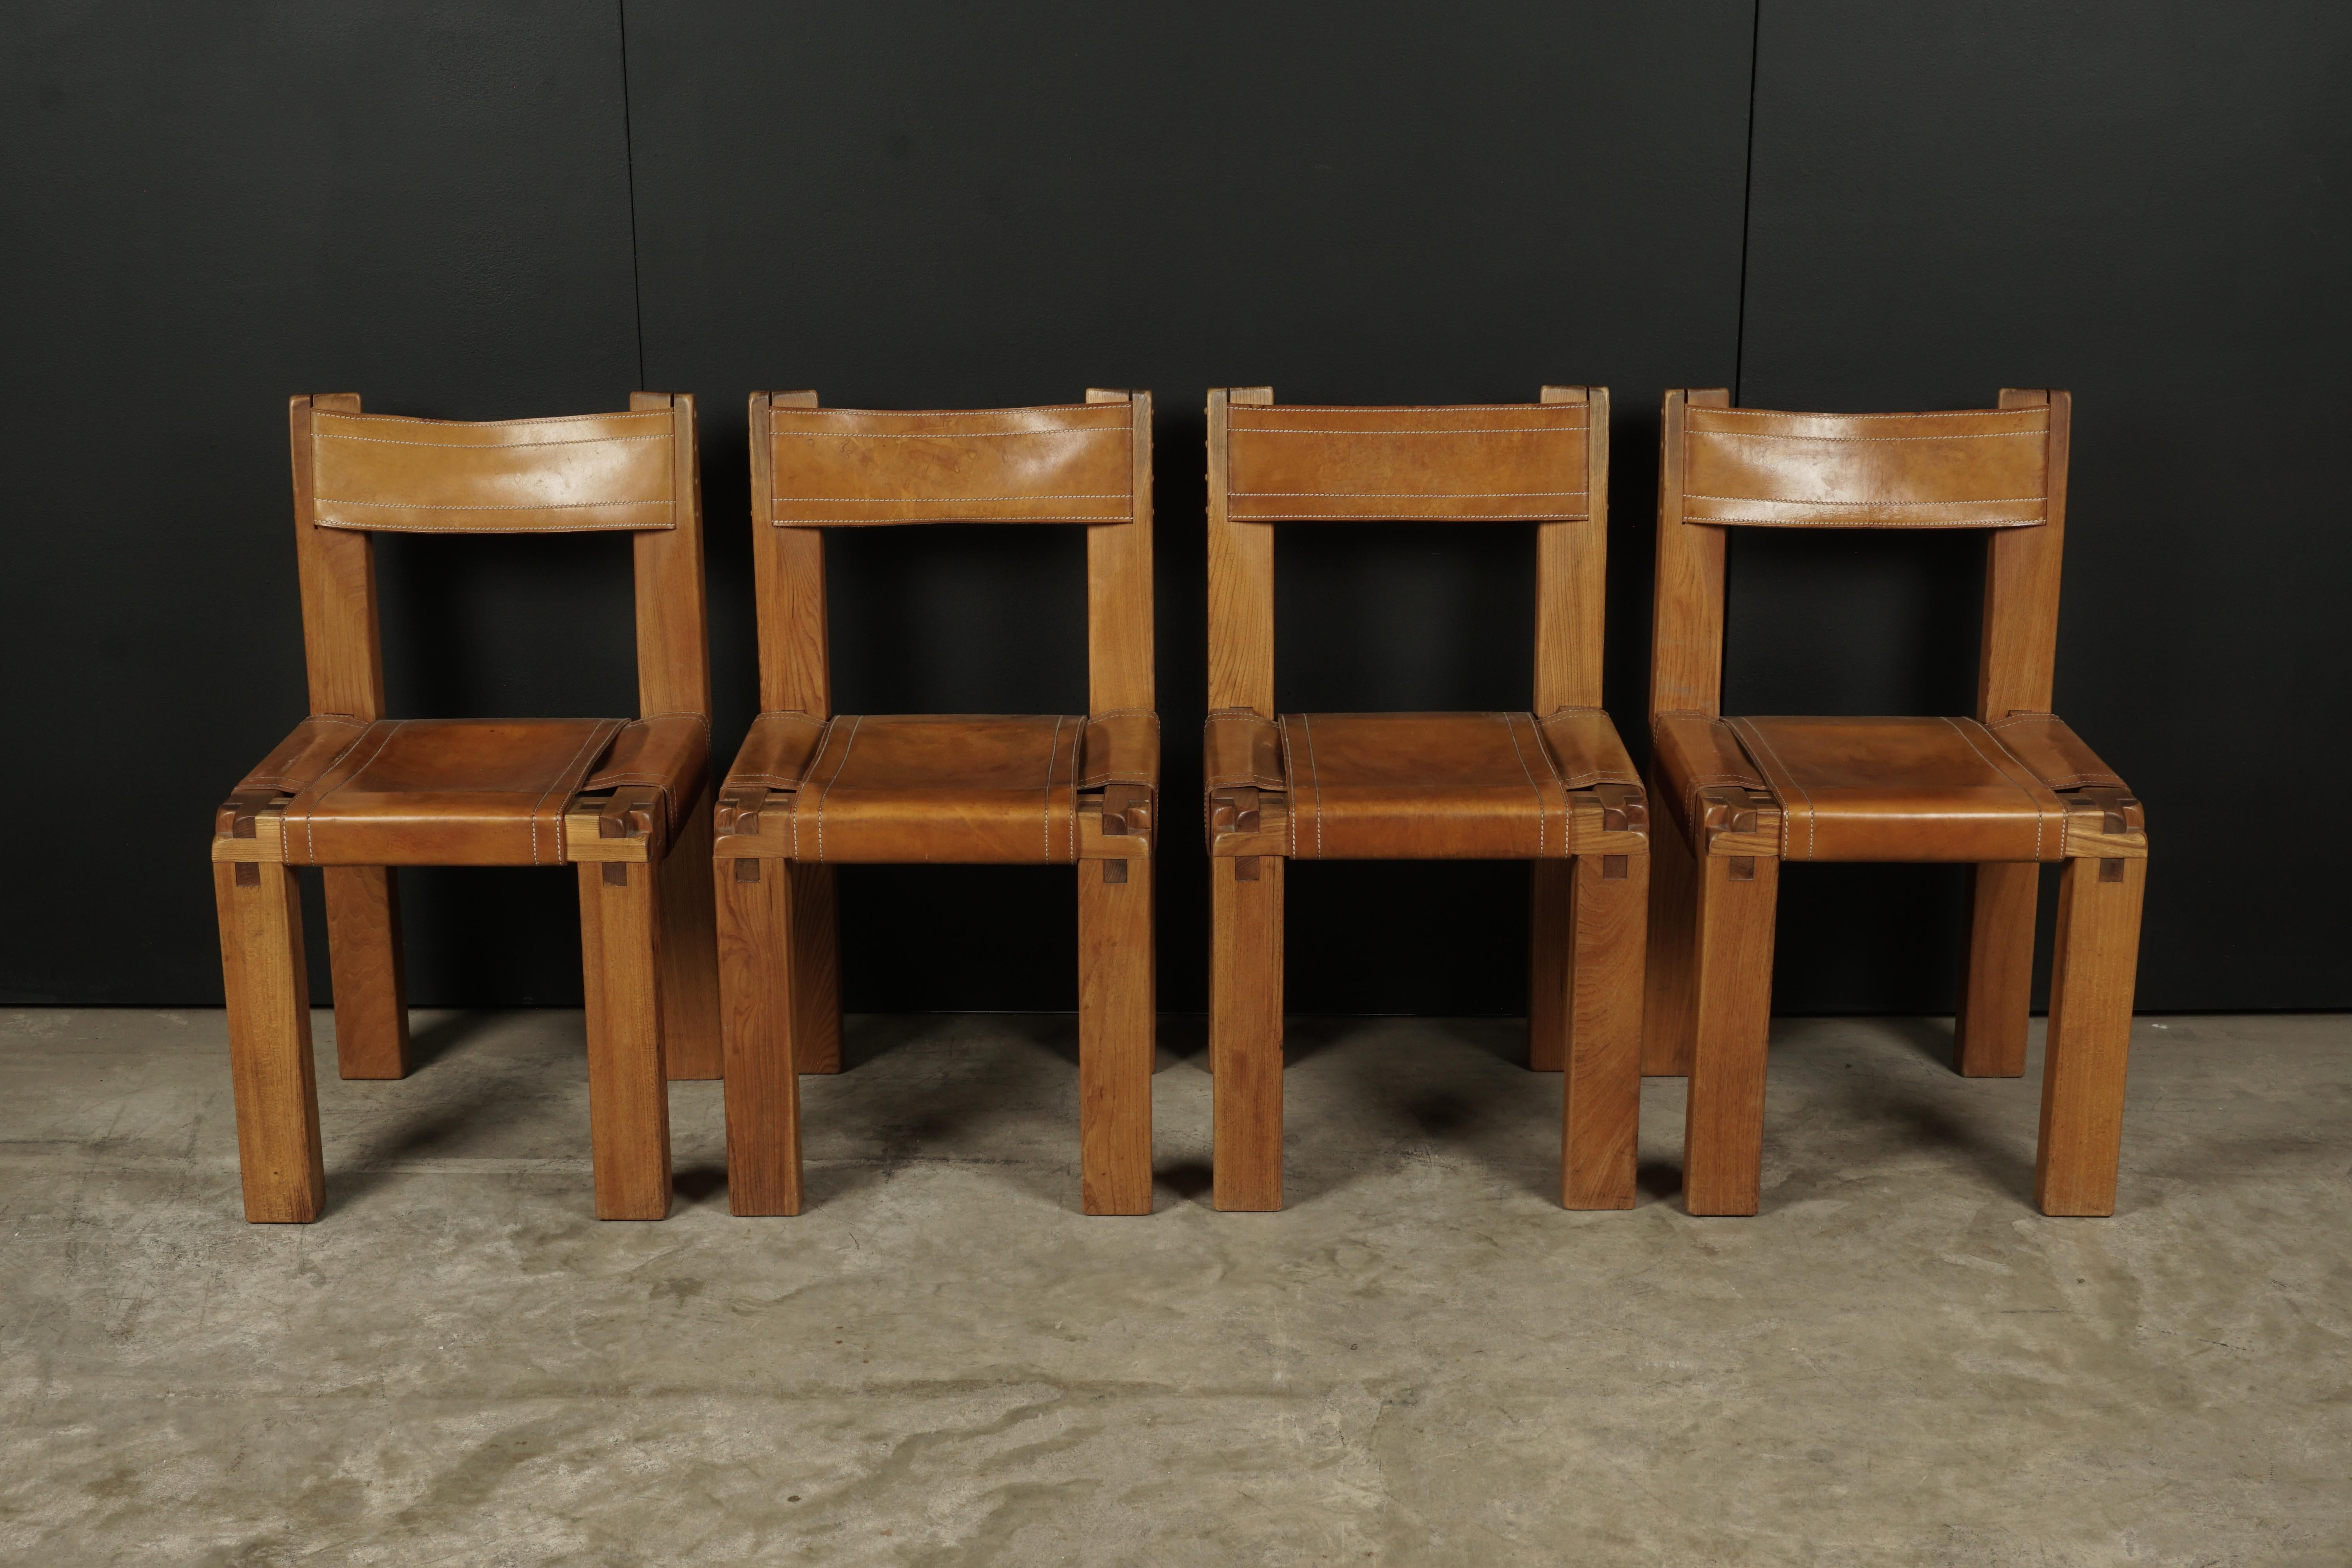 Set of four S11 chairs by Pierre Chapo, France, circa 1960. Solid elmwood construction with original cognac leather. Very good quality and condition.